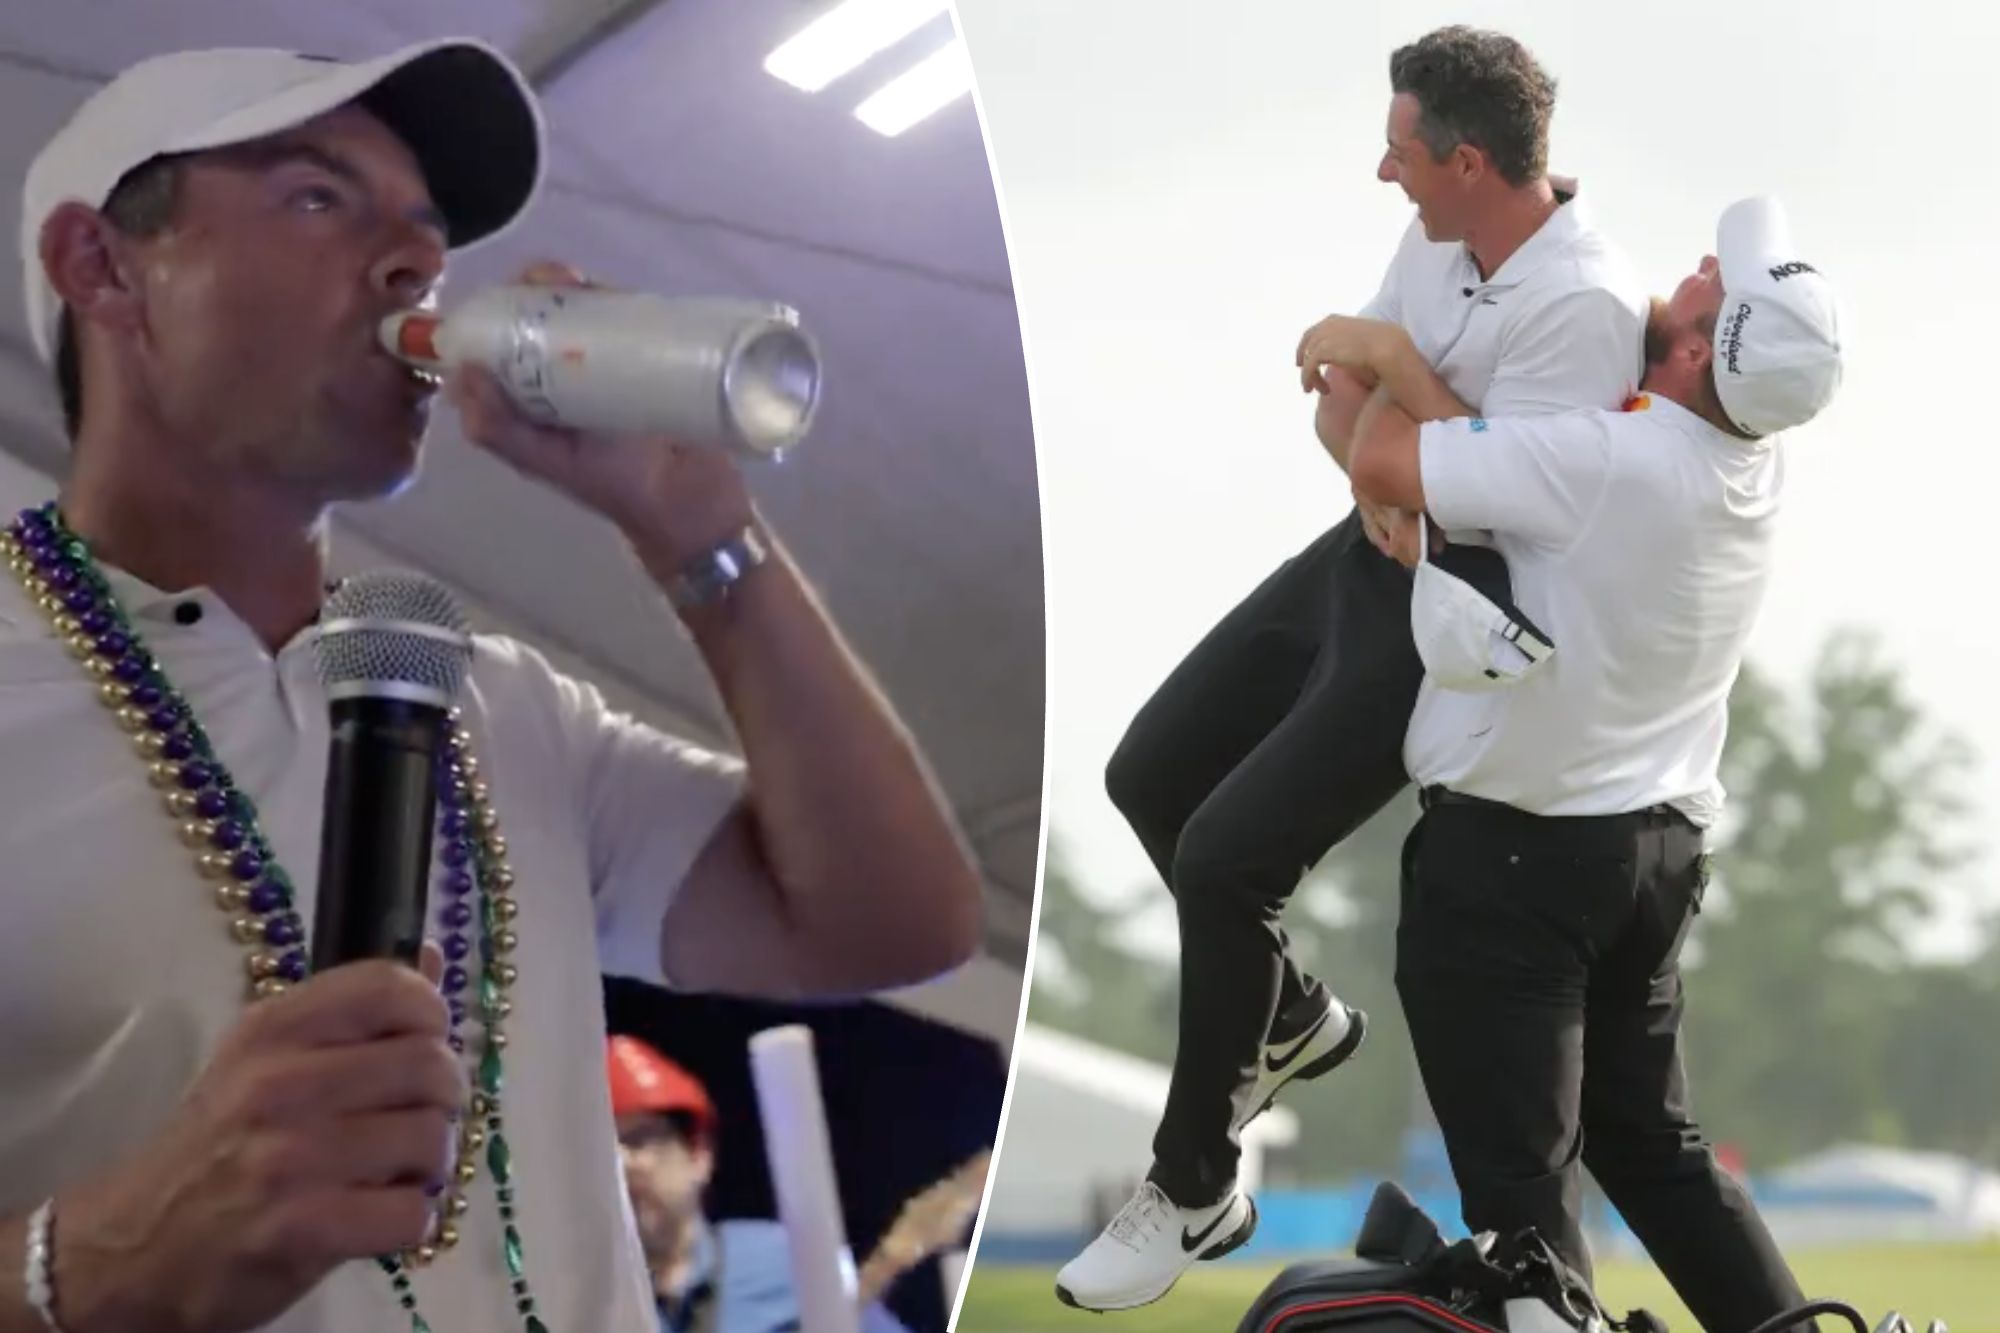 Rory McIlroy chugs a beer during a karaoke session after winning Zurich Classic with Shane Lowry.